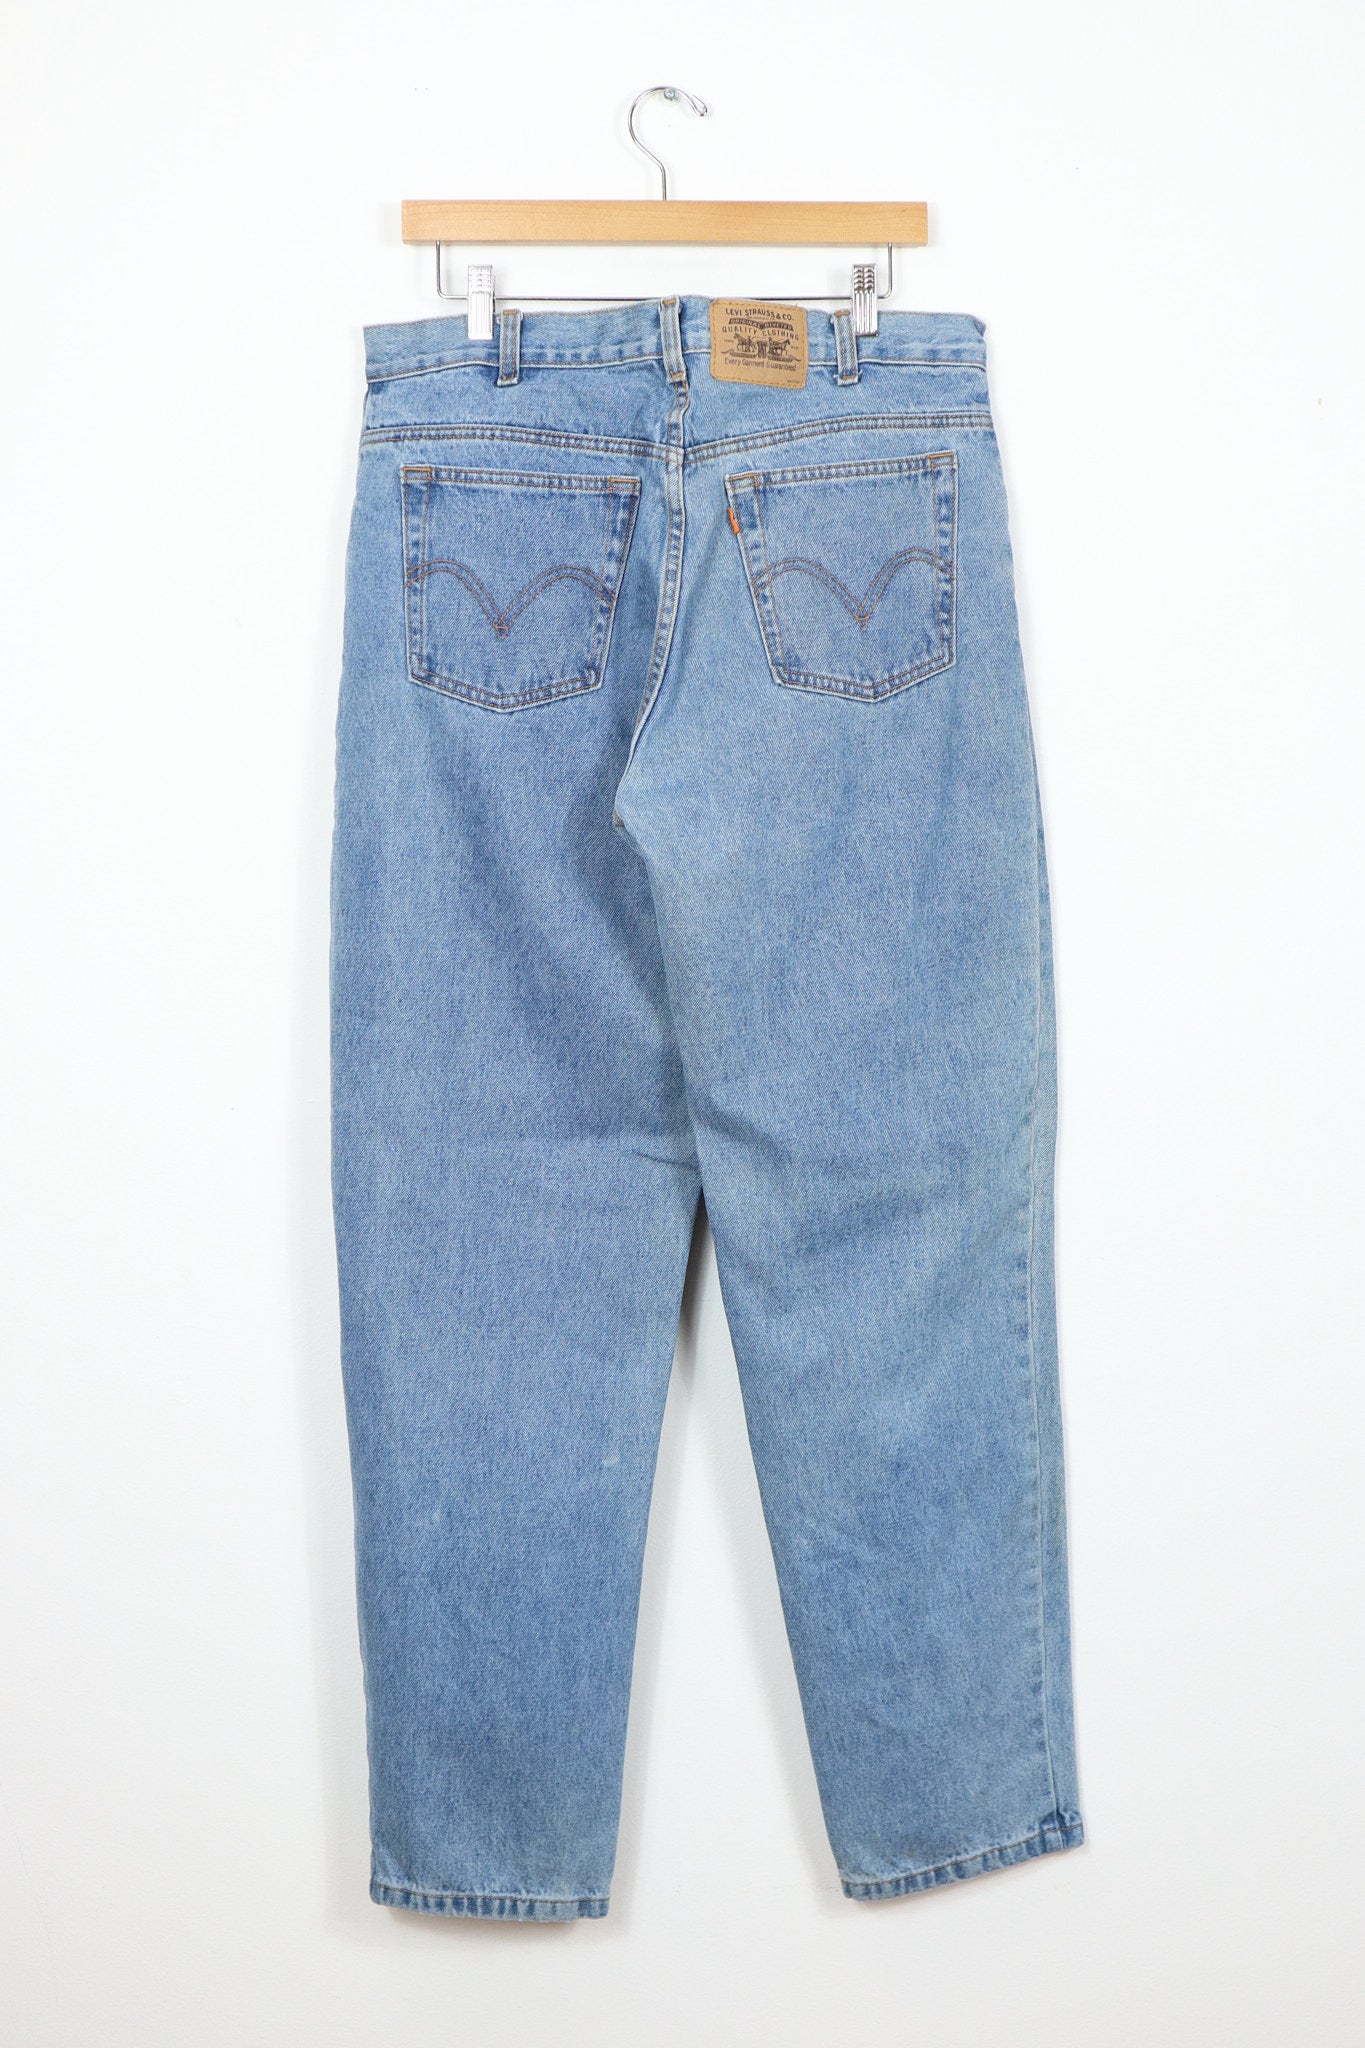 Vintage Levi's Orange Tab Relaxed Tapered Fit Jeans